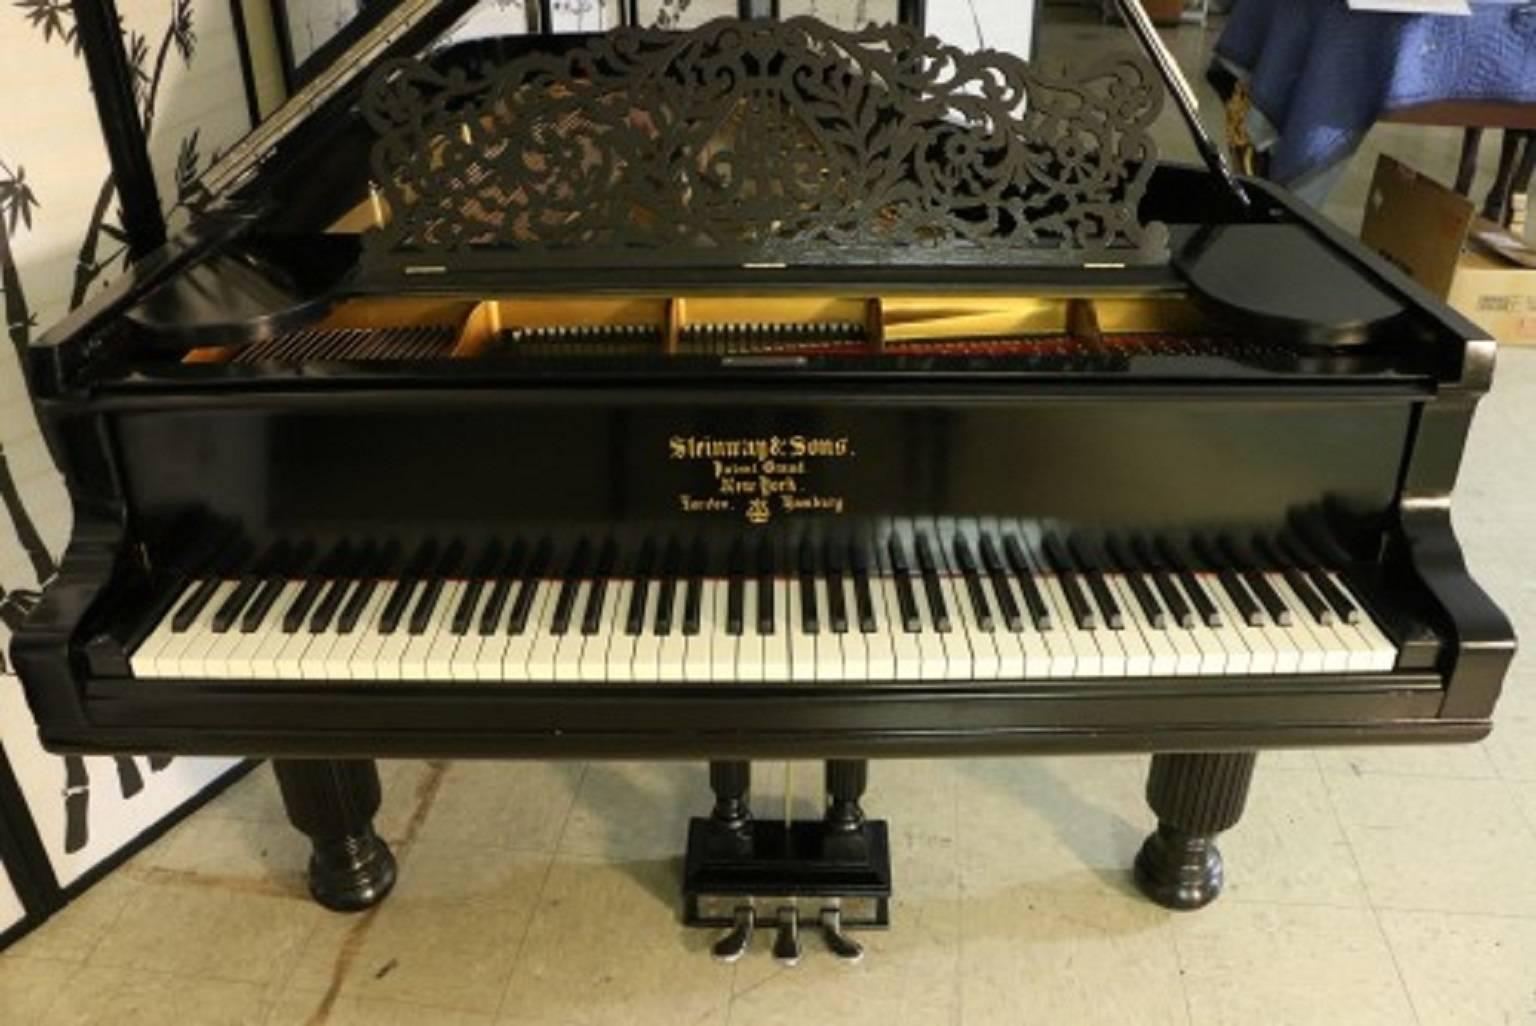 See and hear more about this magnificent piano on the VIDEO at the bottom of Sonny's Luxury Art Case Piano storefront homepage. 

Complete video tour of this piano can be emailed to you upon request. Message us. 

Classic vintage Steinway C 7'5